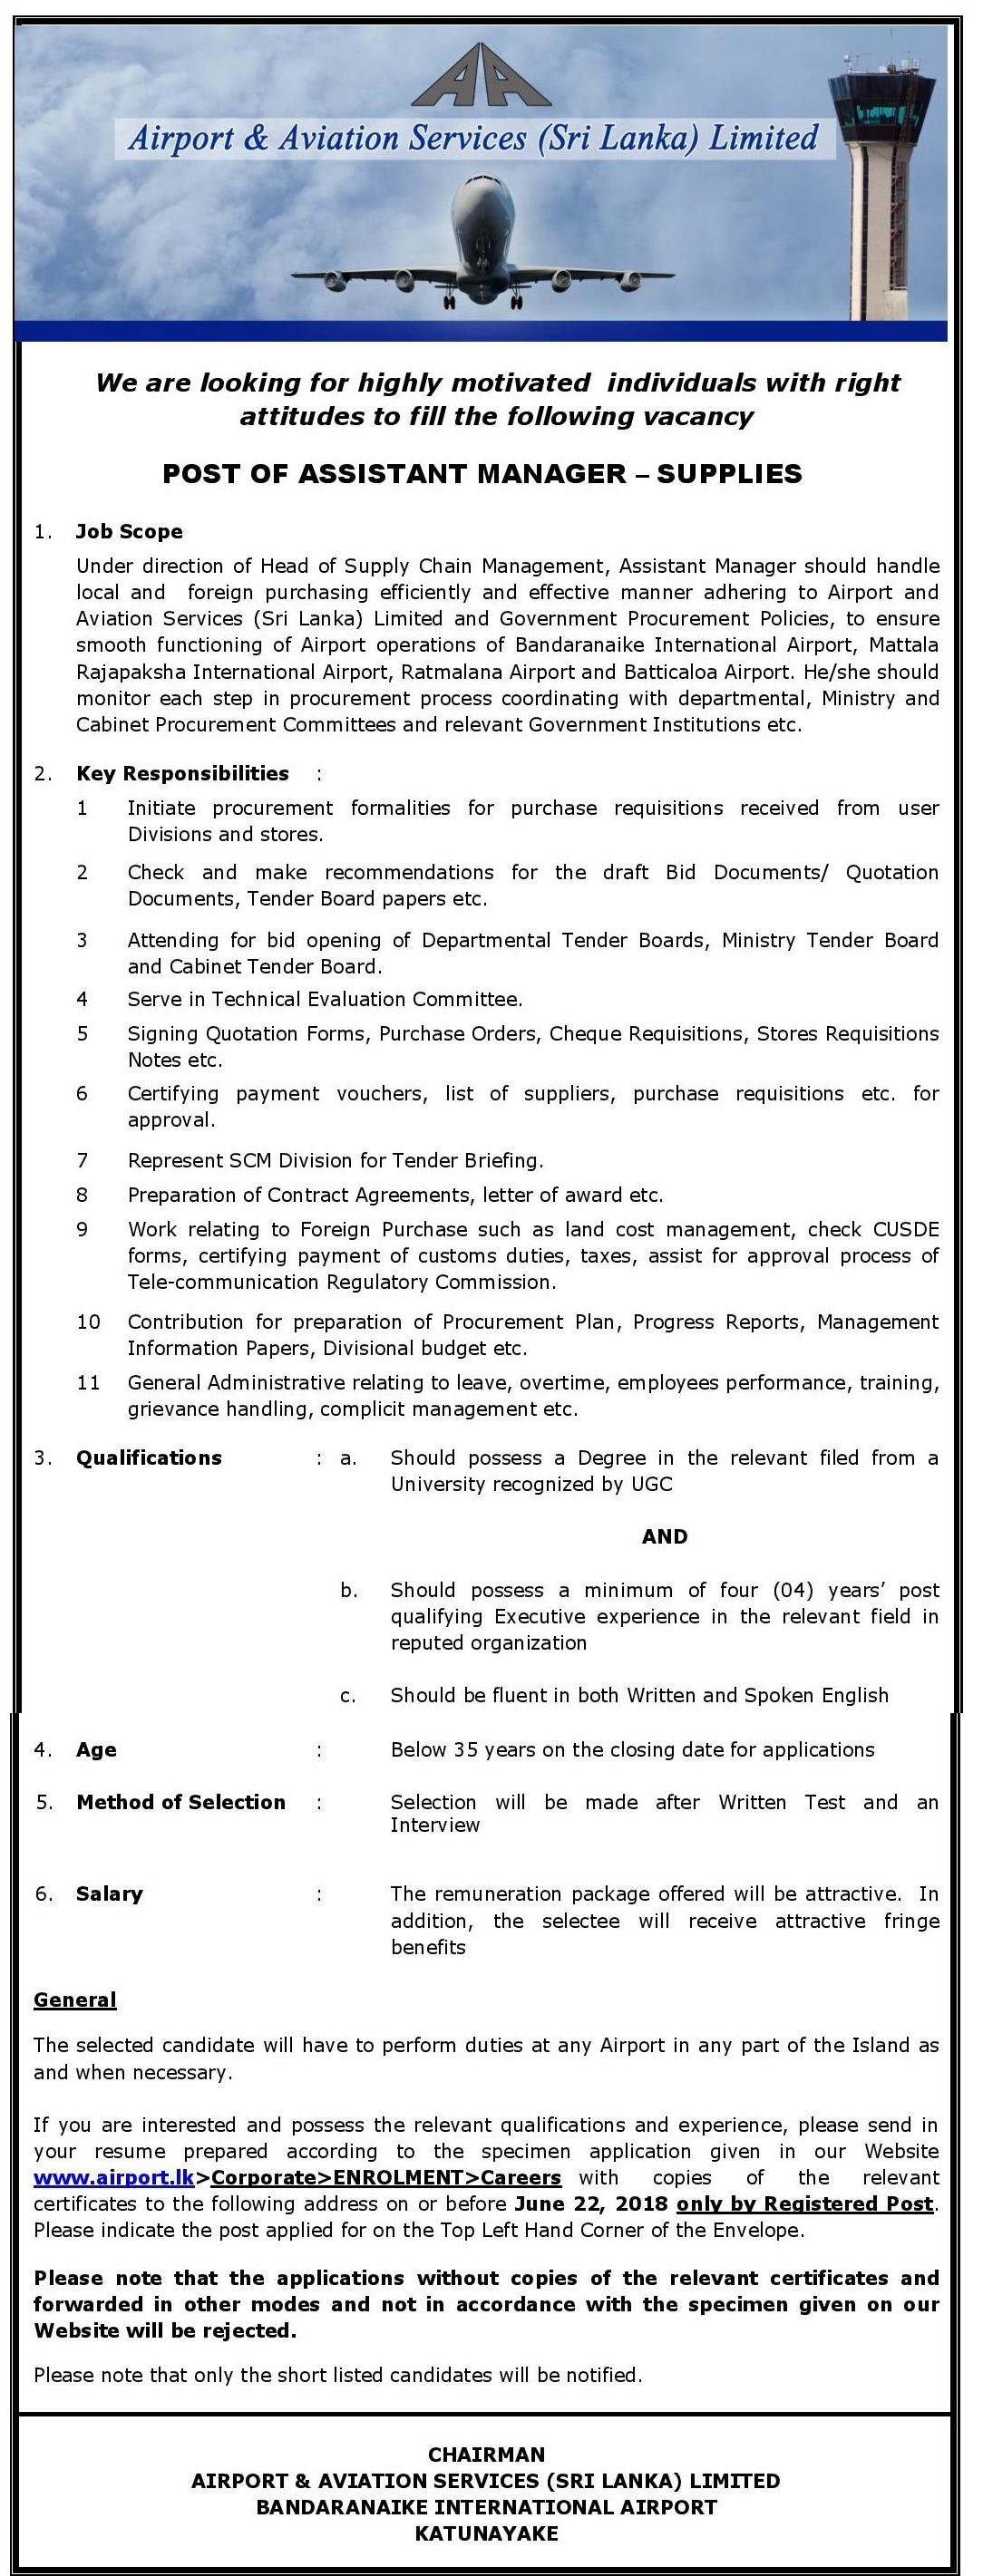 Assistant Manager (Supplies) - Airport & Aviation Services Jobs Vacancies